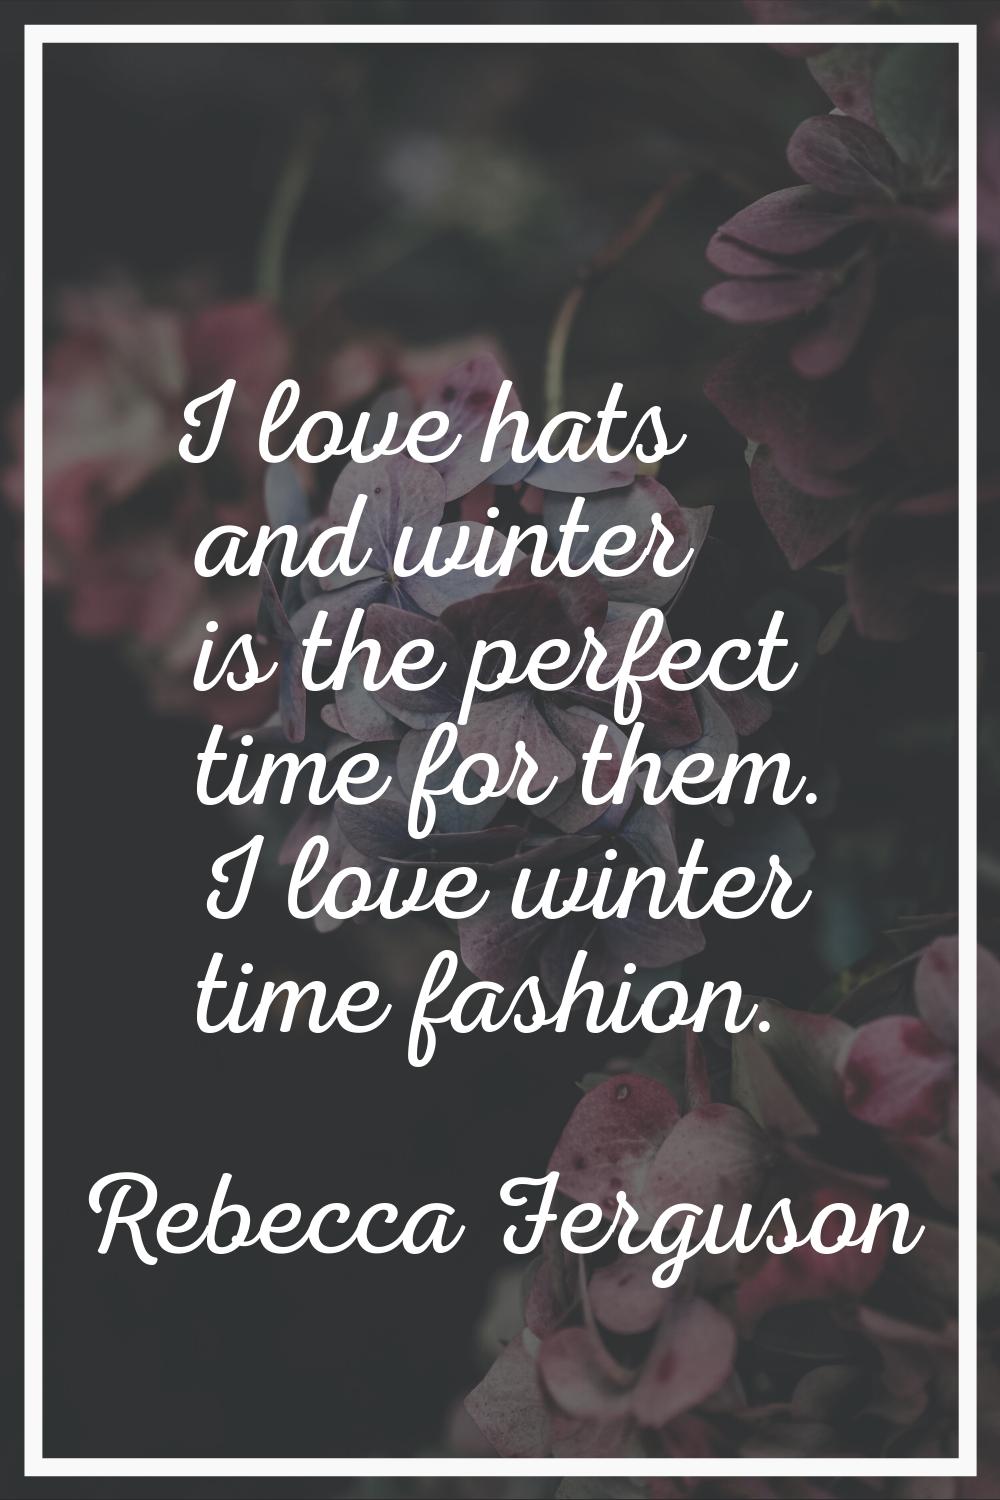 I love hats and winter is the perfect time for them. I love winter time fashion.